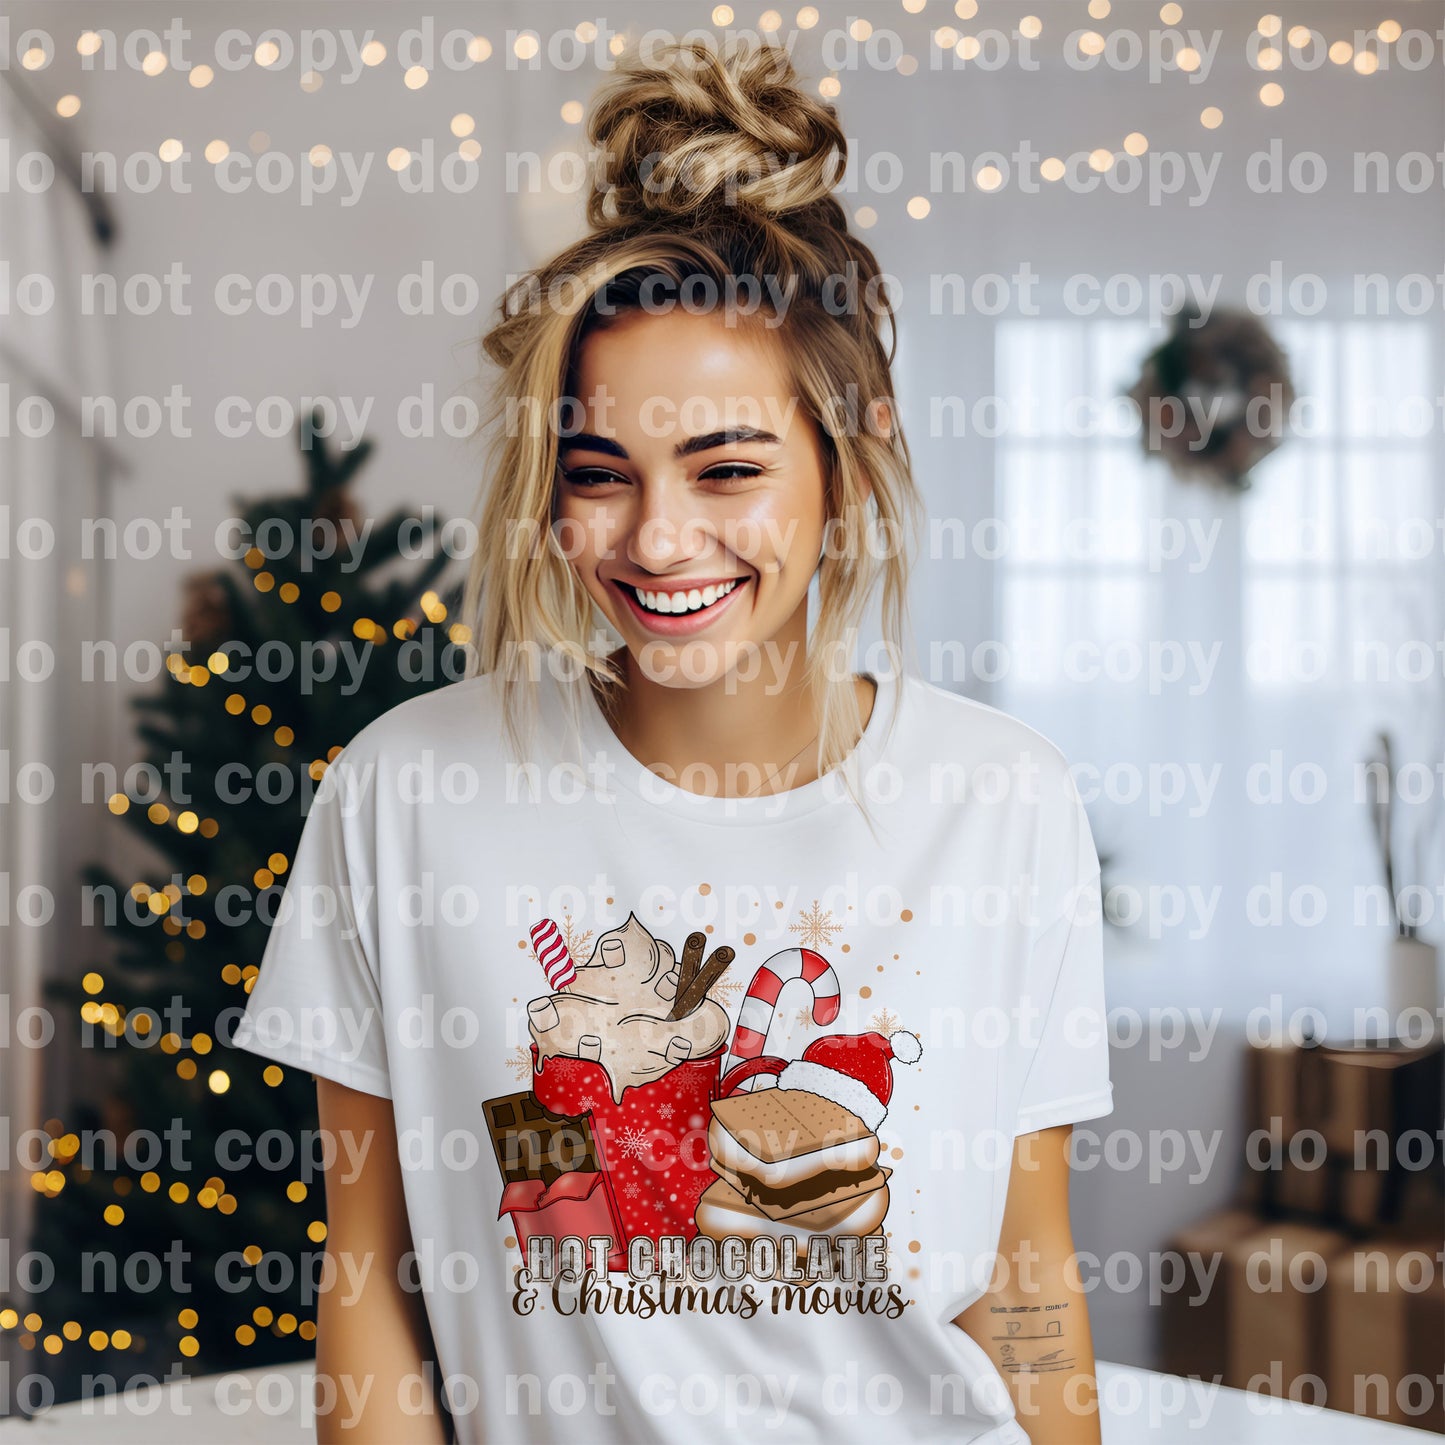 Hot Chocolate and Christmas Movies with Optional Two Rows Sleeve Designs Dream Print or Sublimation Print